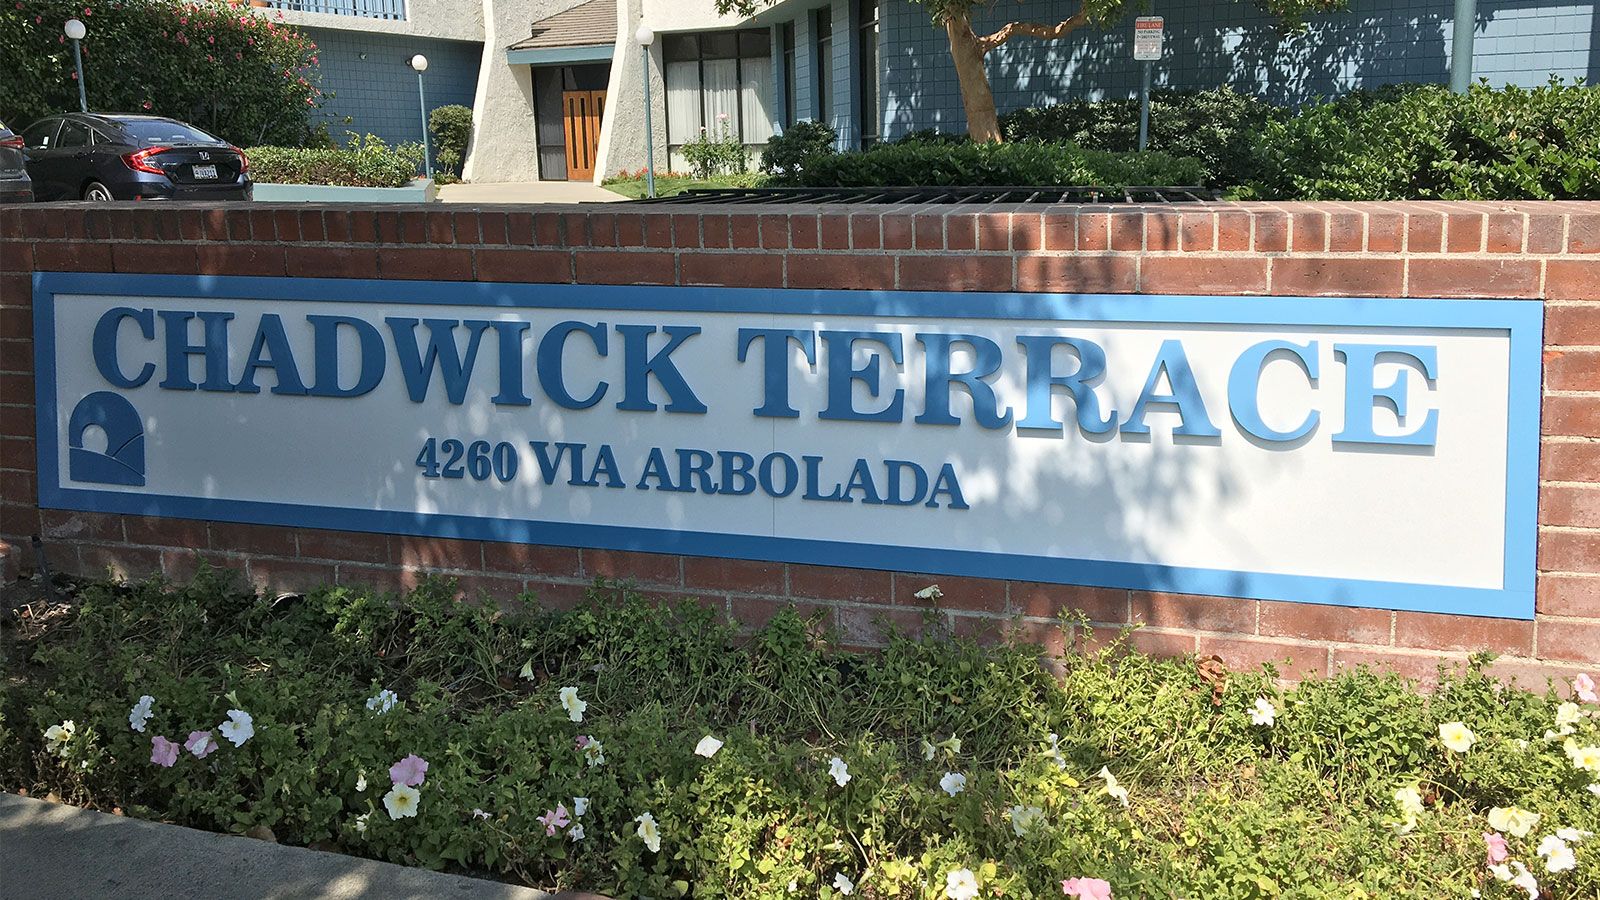 Chadwick Terrace monument sign